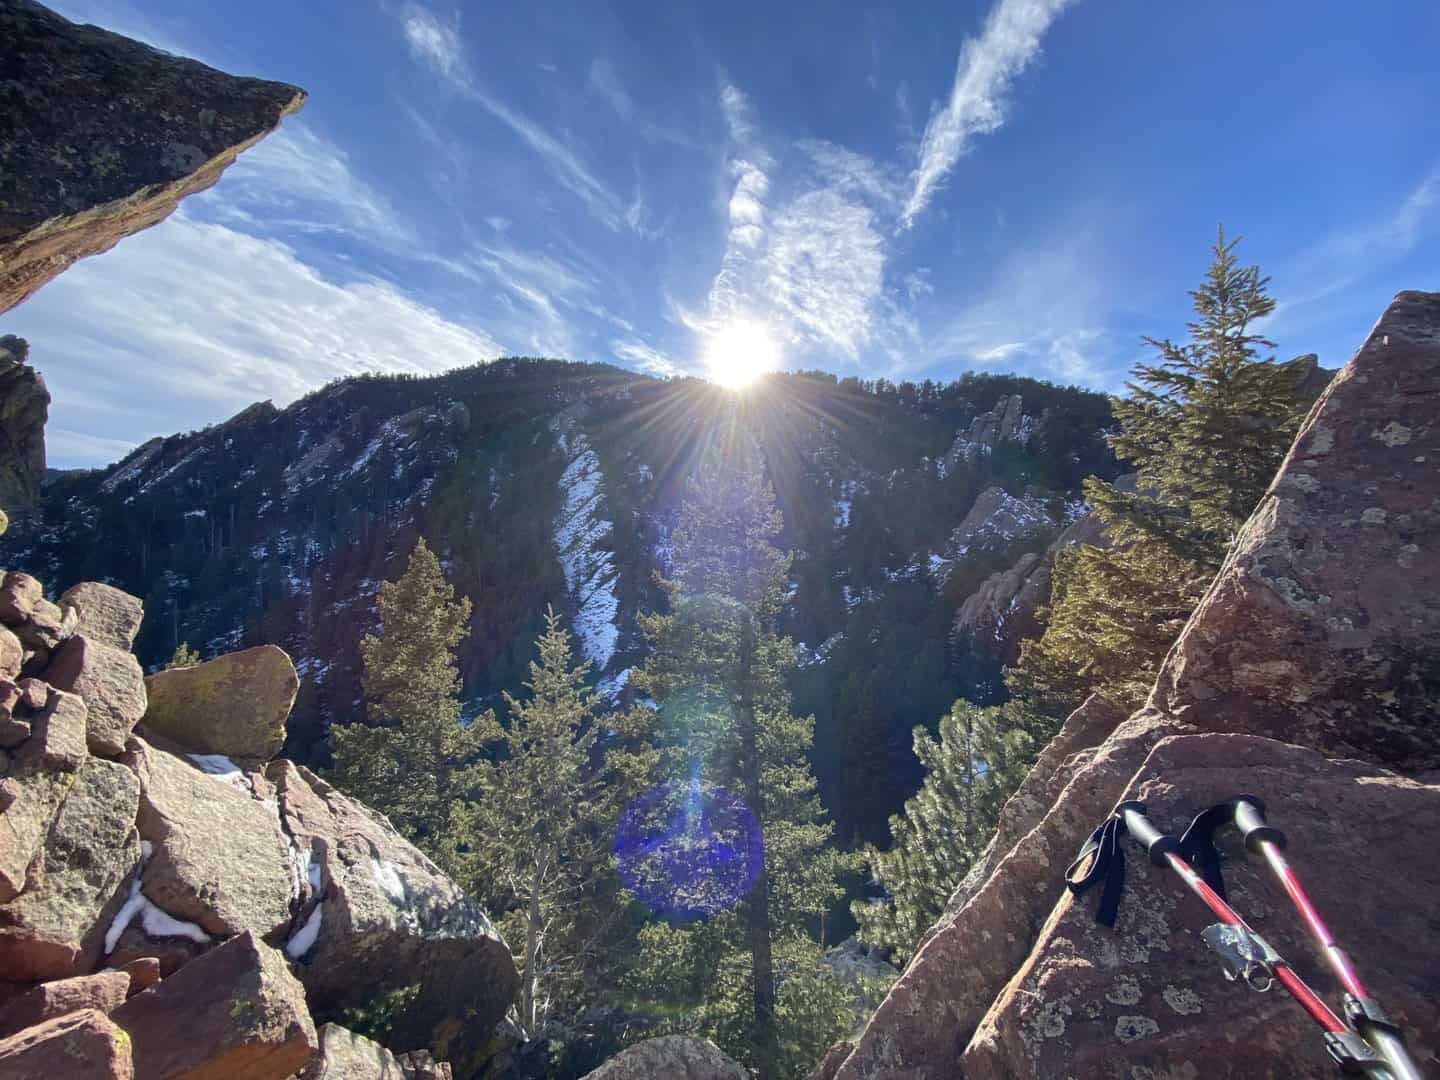 sun behind mountain in Colorado with trekking poles in foreground